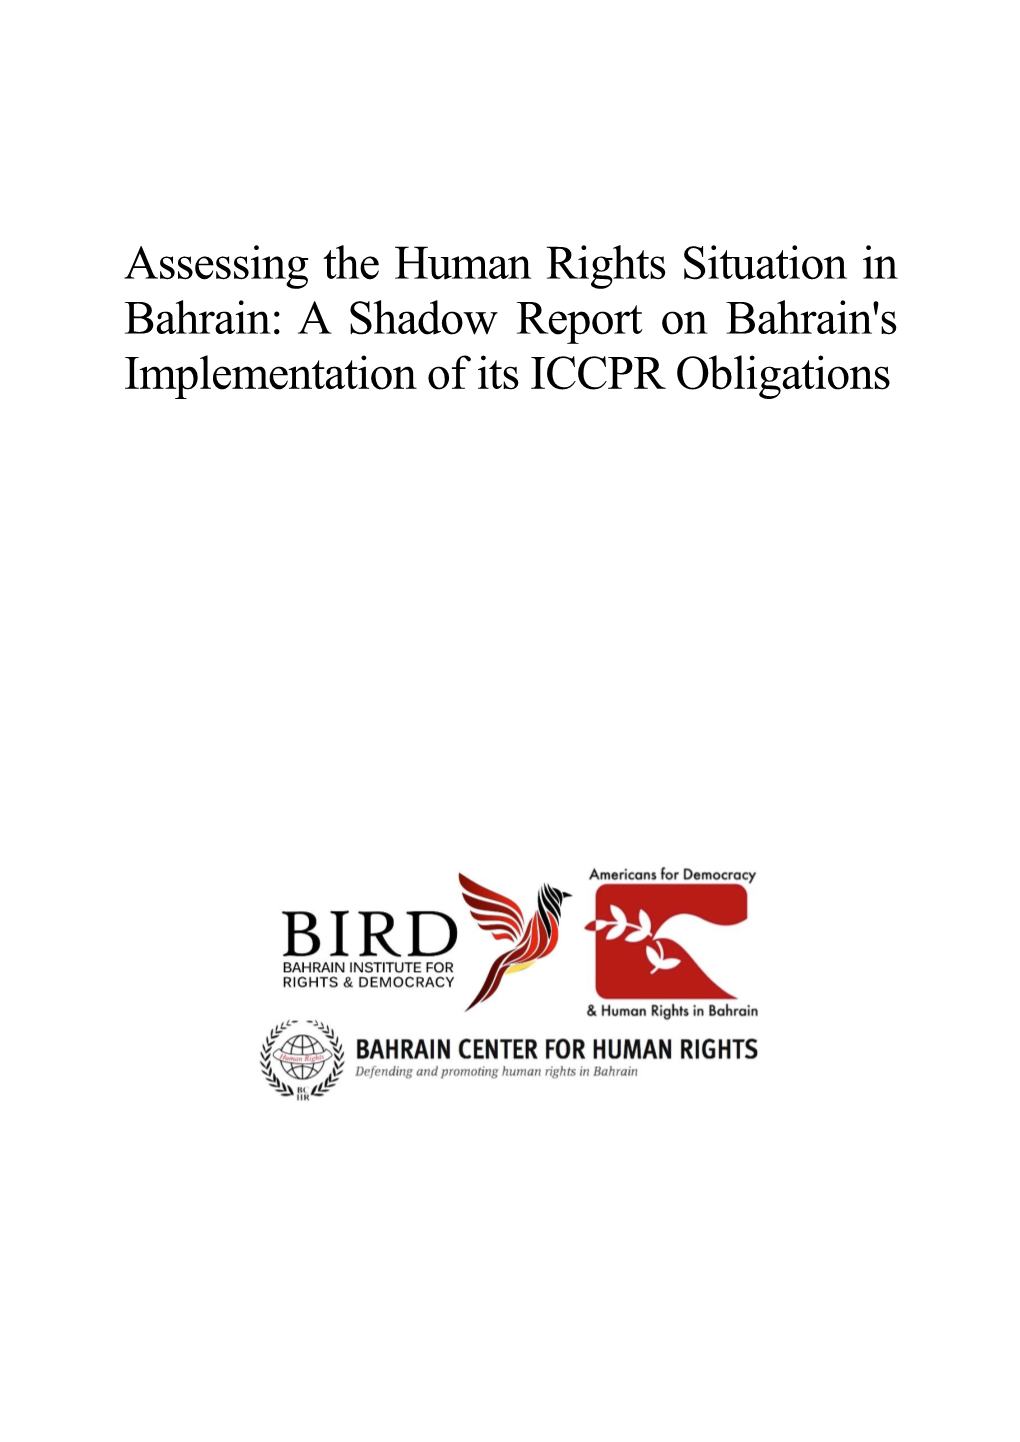 Assessing the Human Rights Situation in Bahrain: a Shadow Report on Bahrain's Implementation of Its ICCPR Obligations